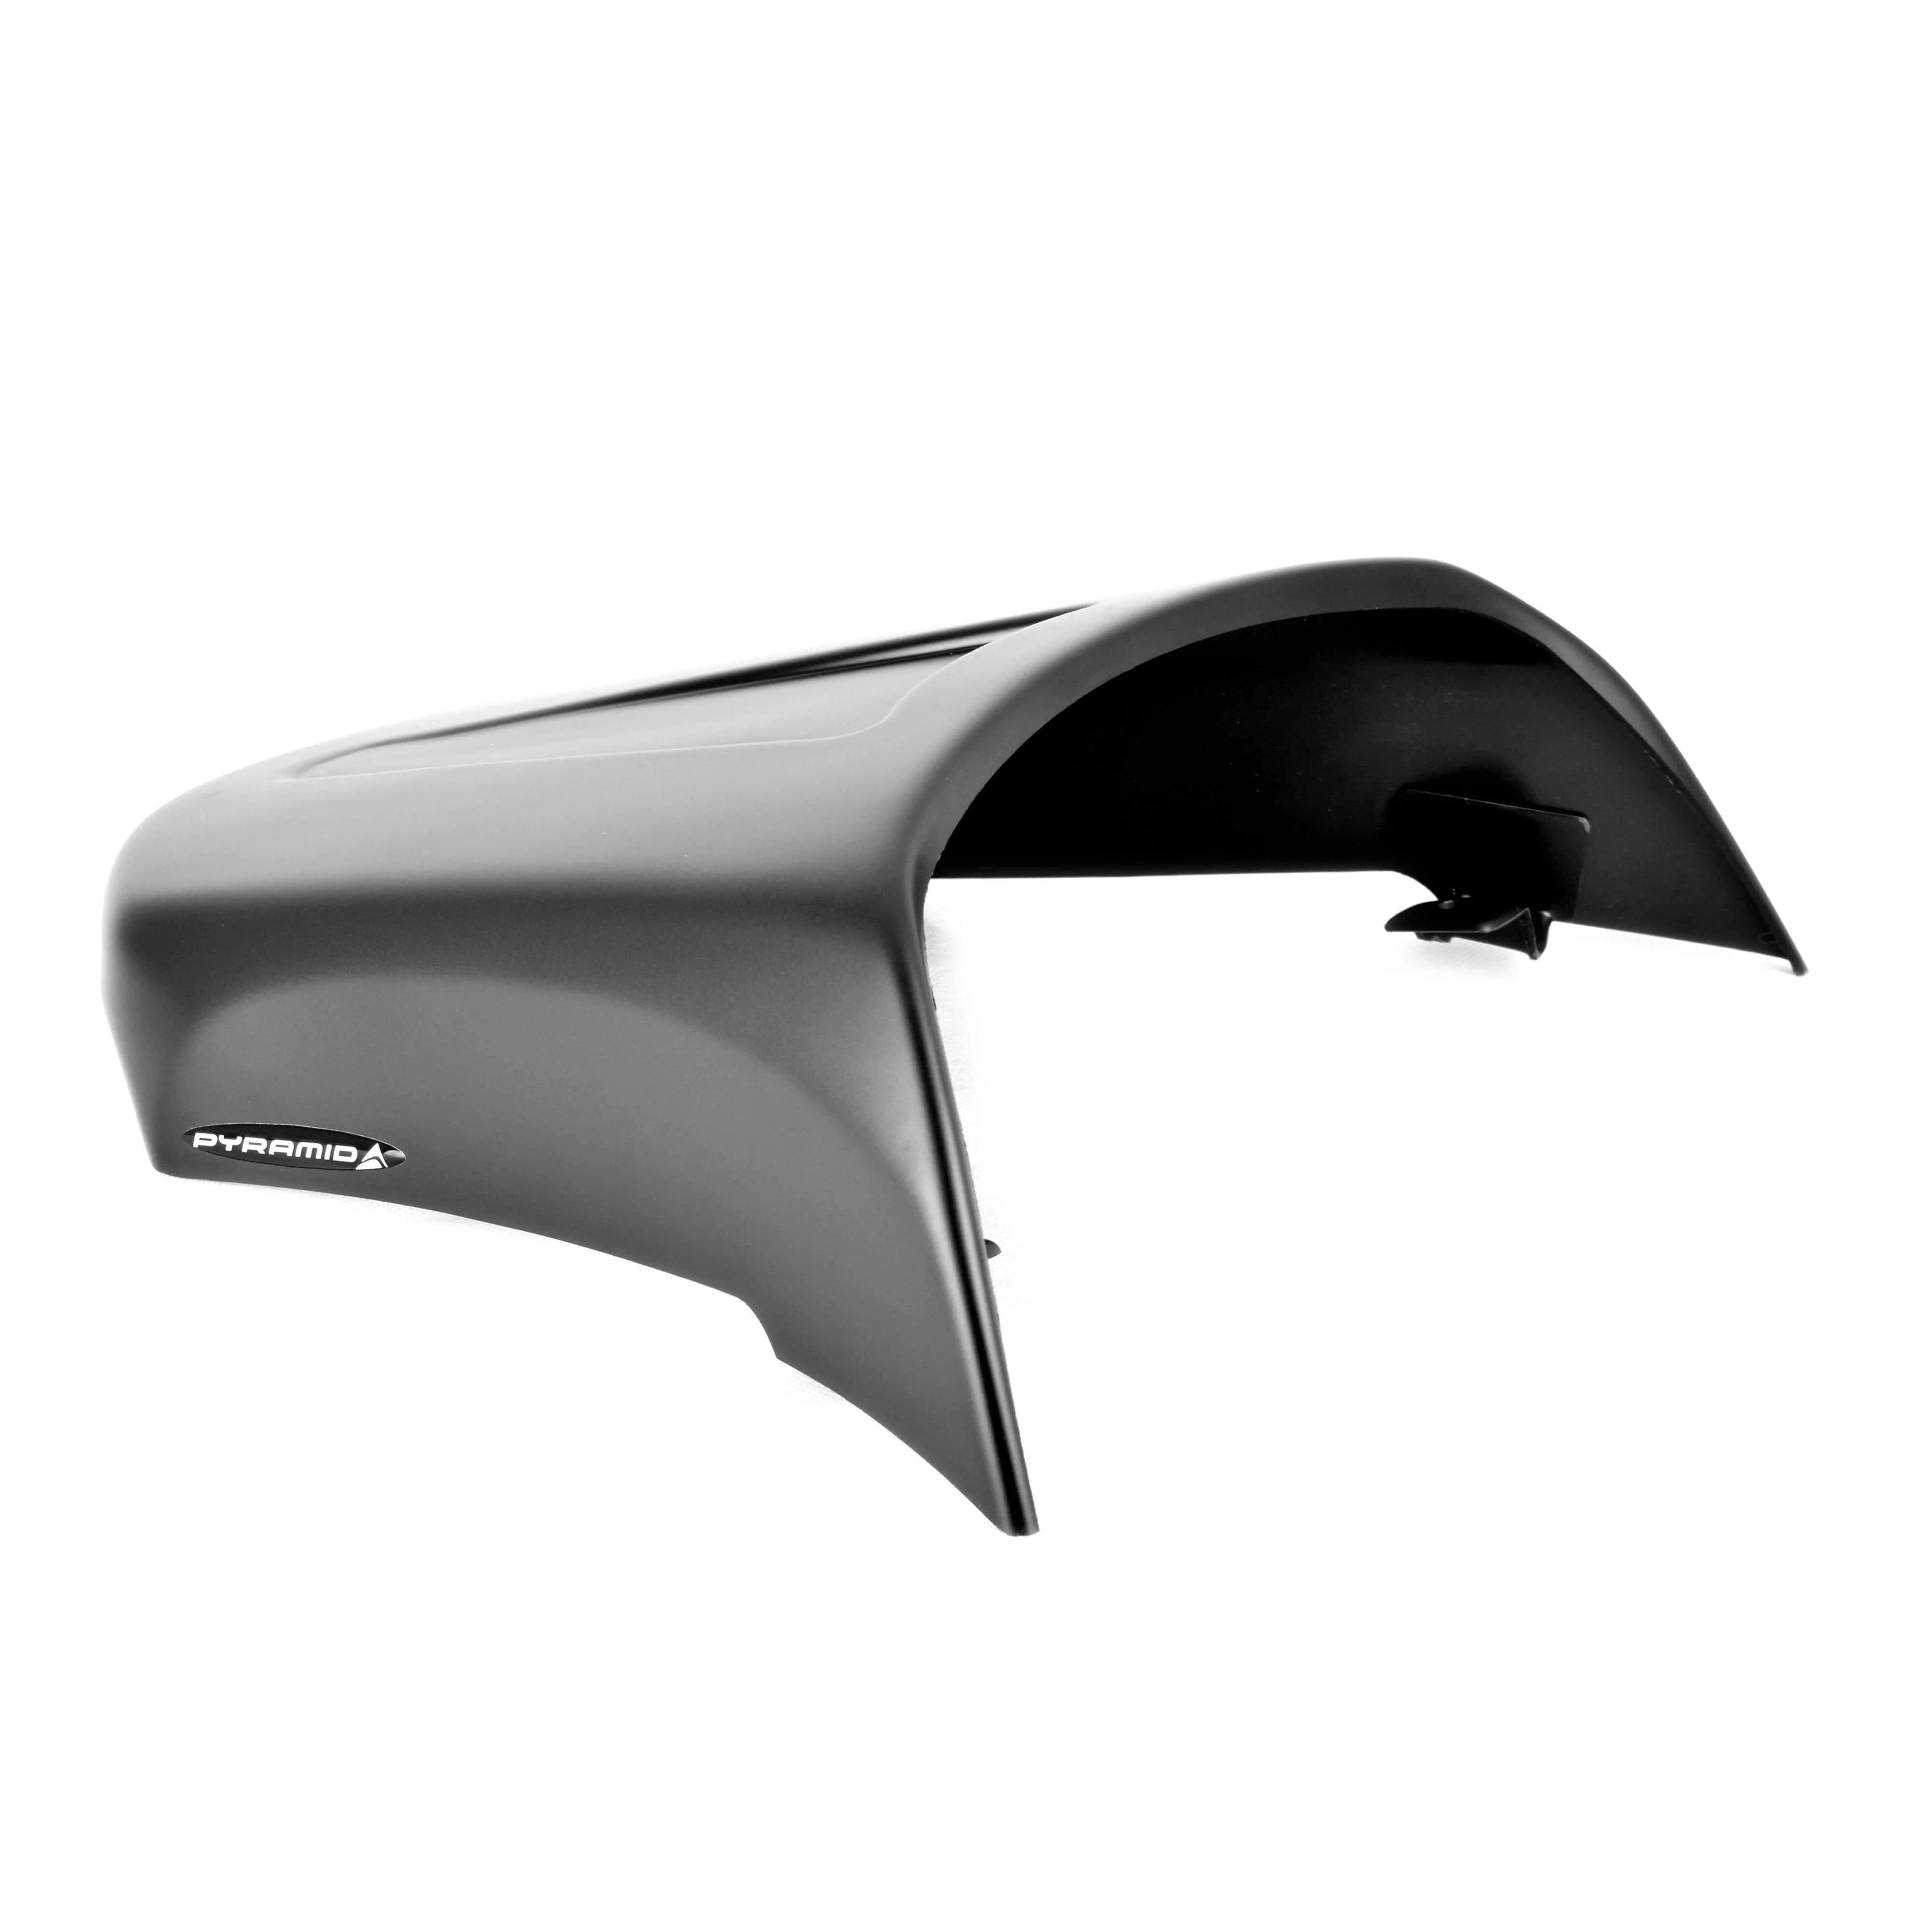 Pyramid Comfort Seat Cowl | Unpainted | Yamaha MT-10 SP 2016>Current-12413U-Seat Cowls-Pyramid Motorcycle Accessories